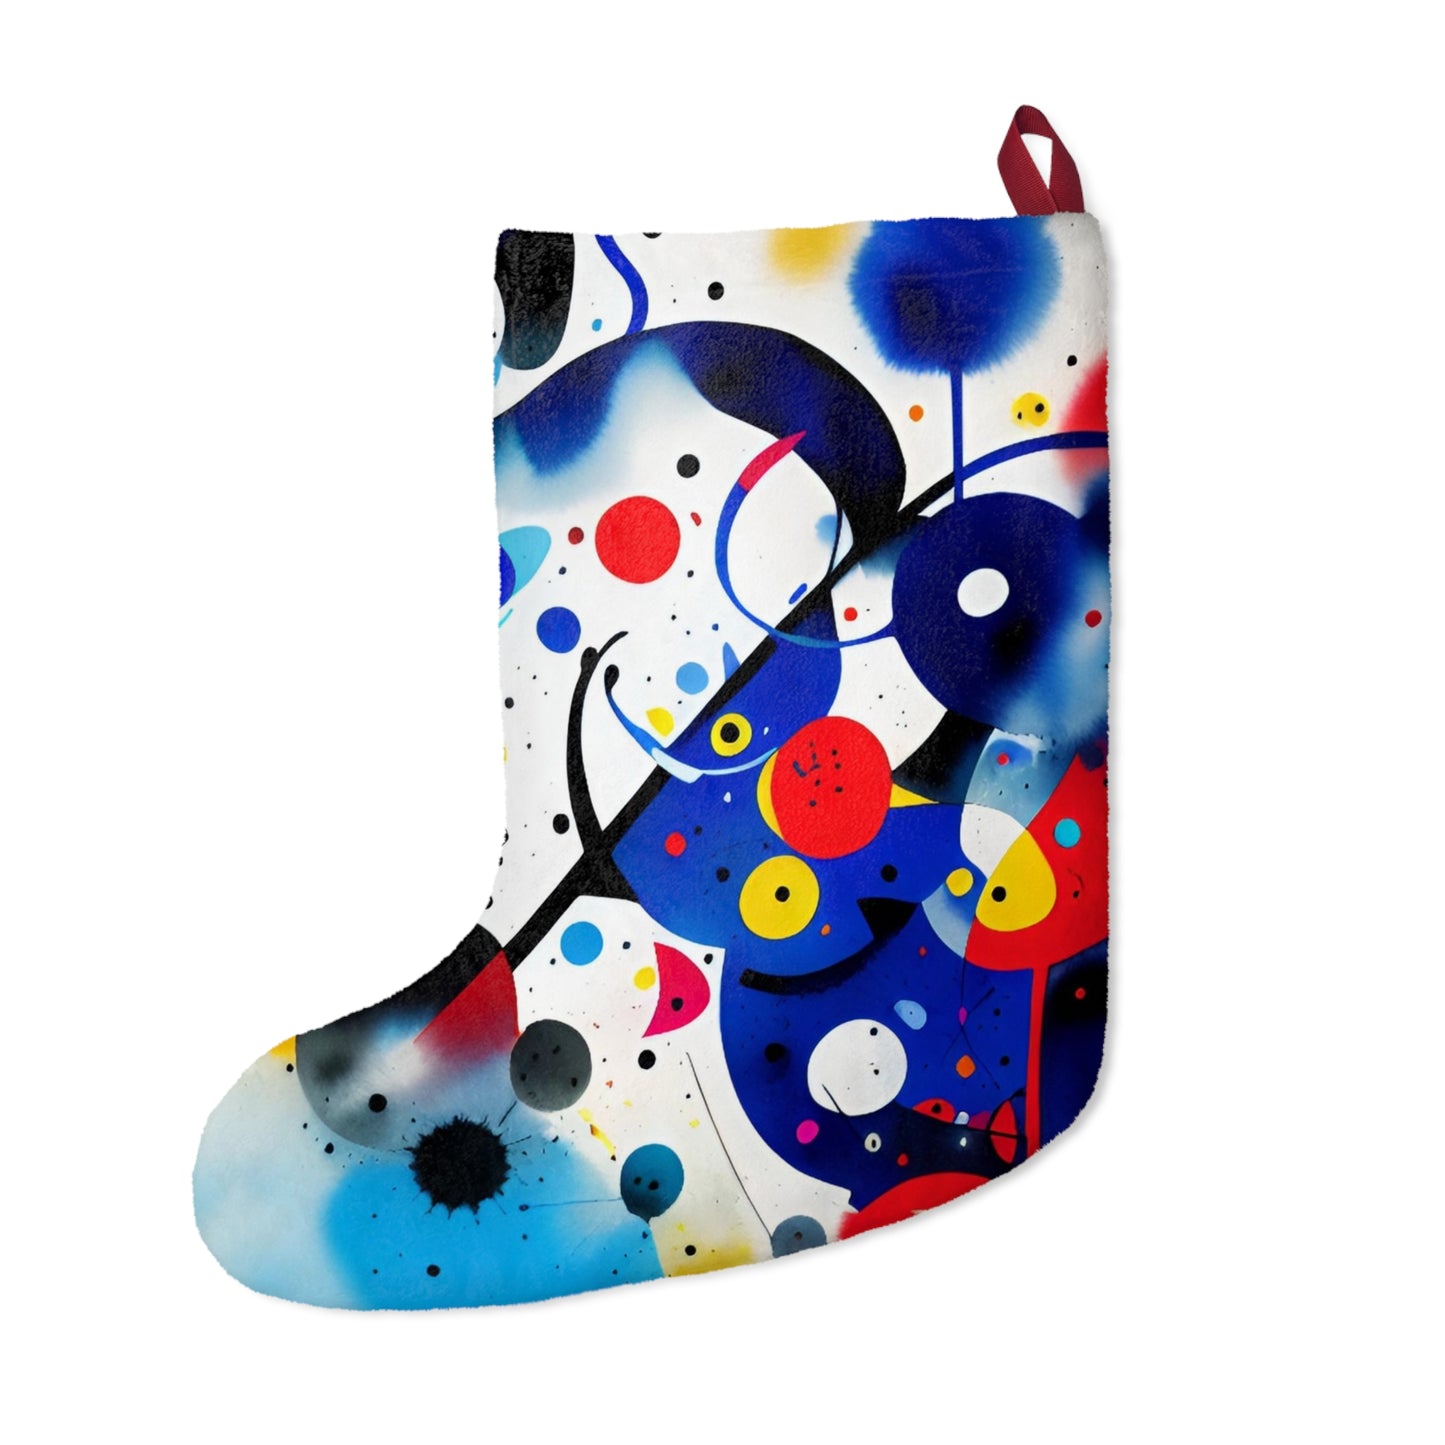 Abstract Christmas Stockings, Inspired by Miro